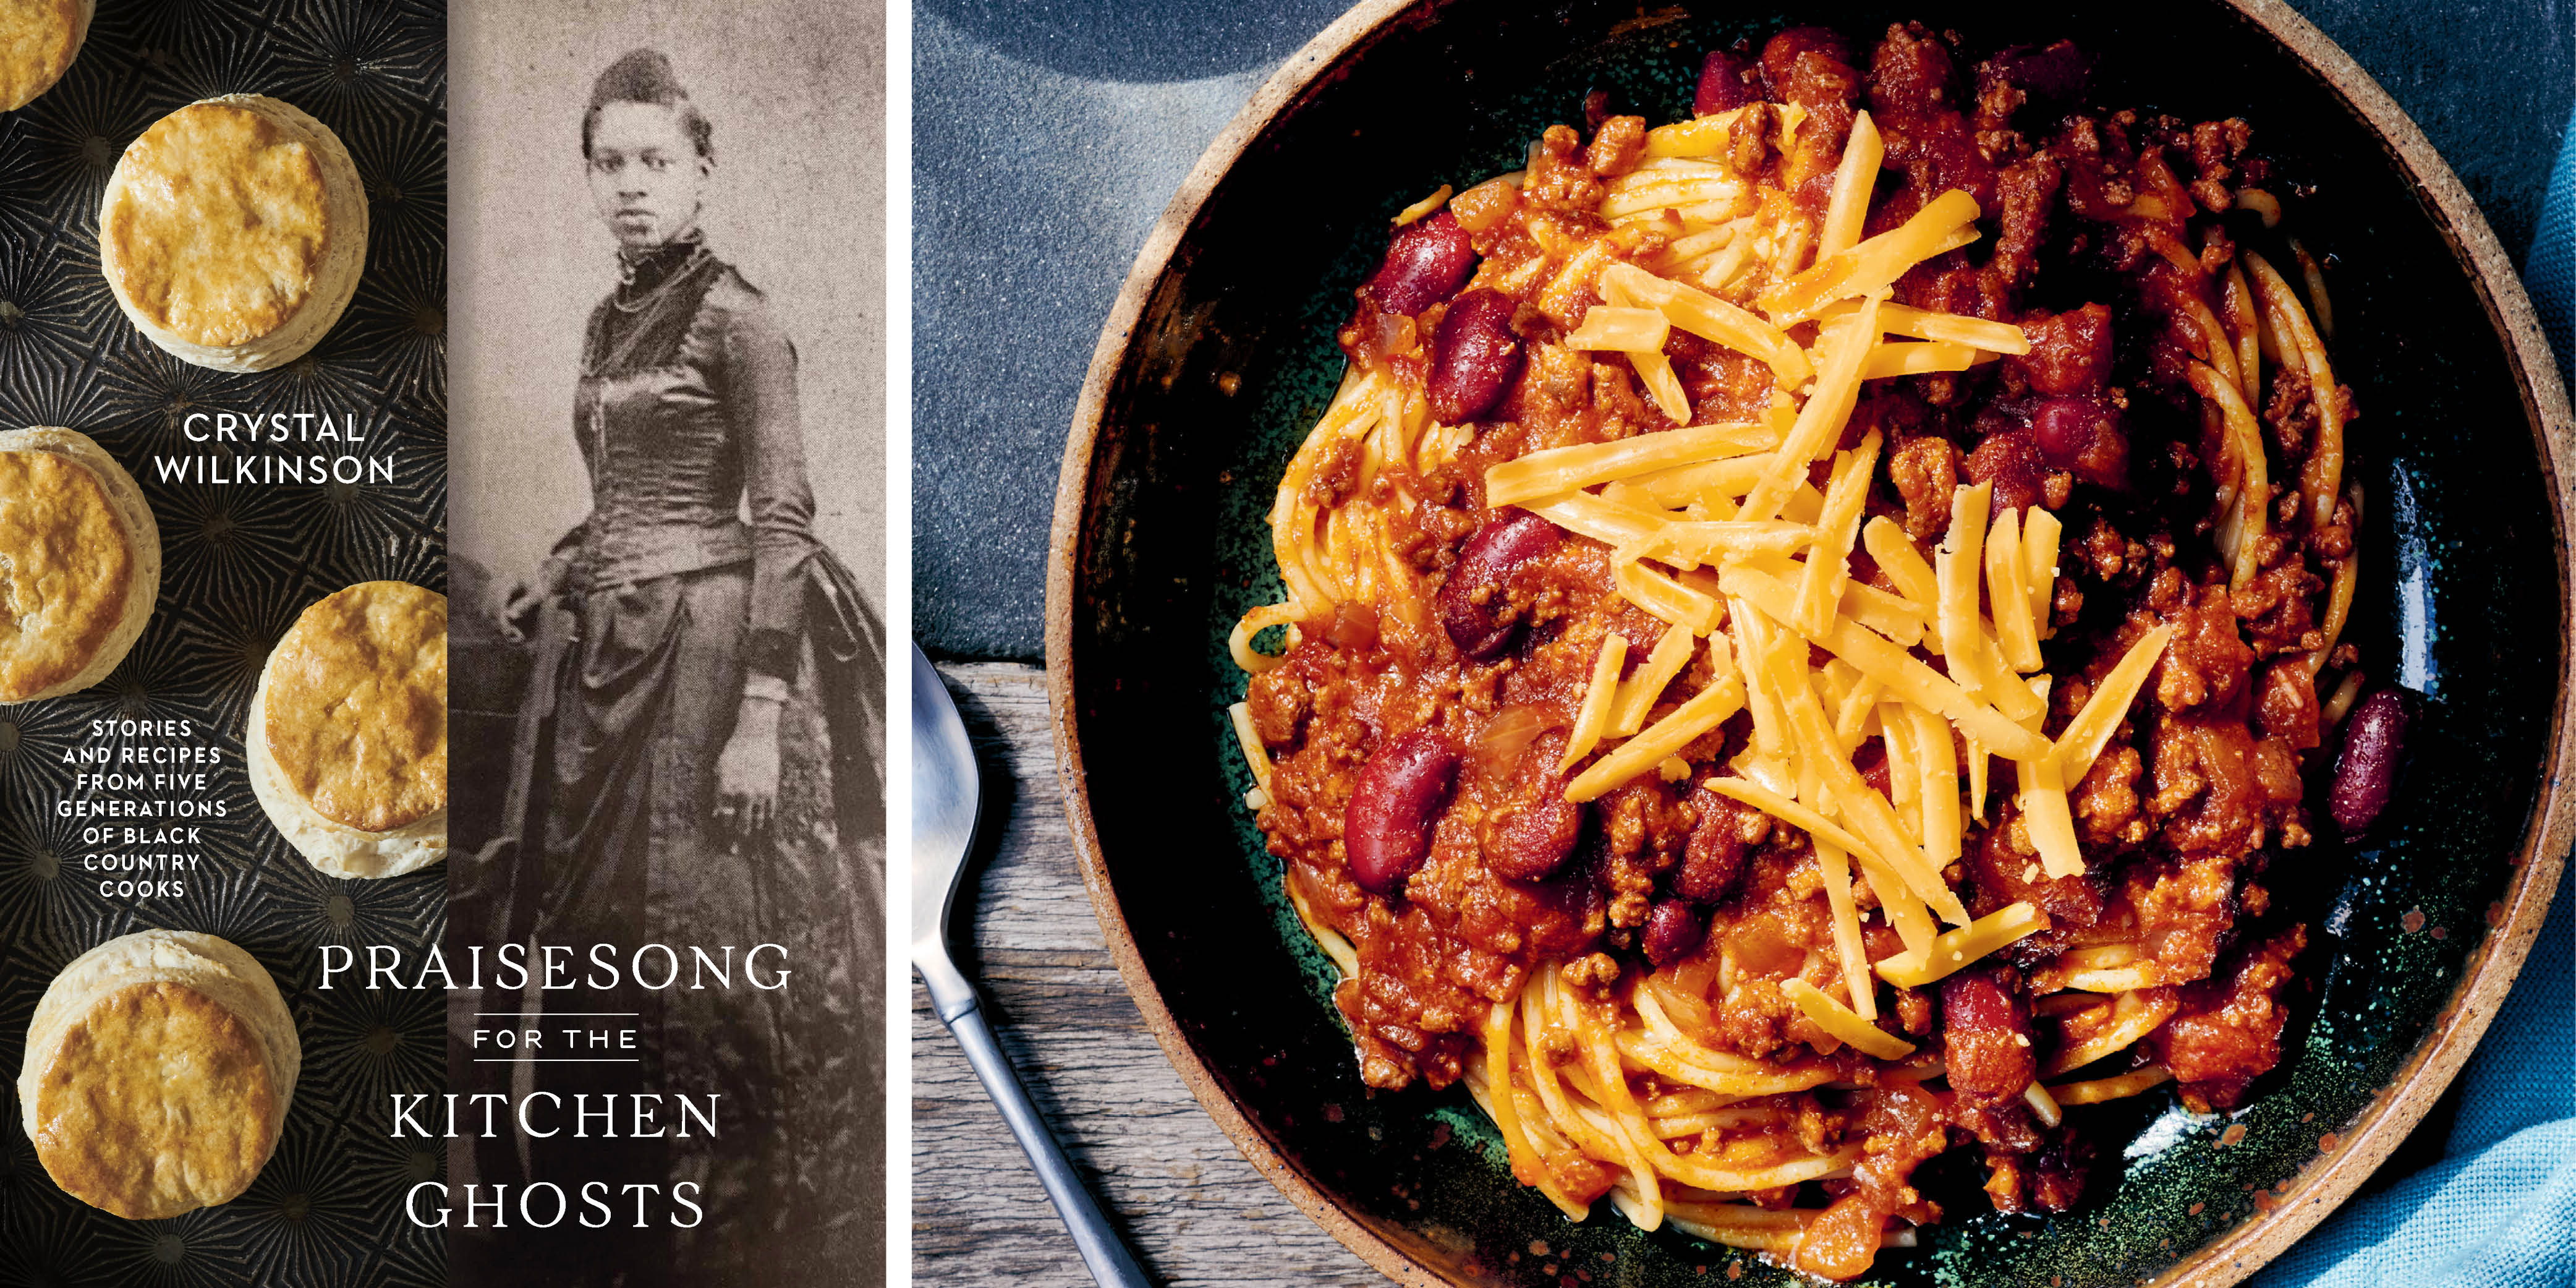 Indian Creek Chili: A Recipe from Praisesong for the Kitchen Ghosts by Crystal Wilkinson